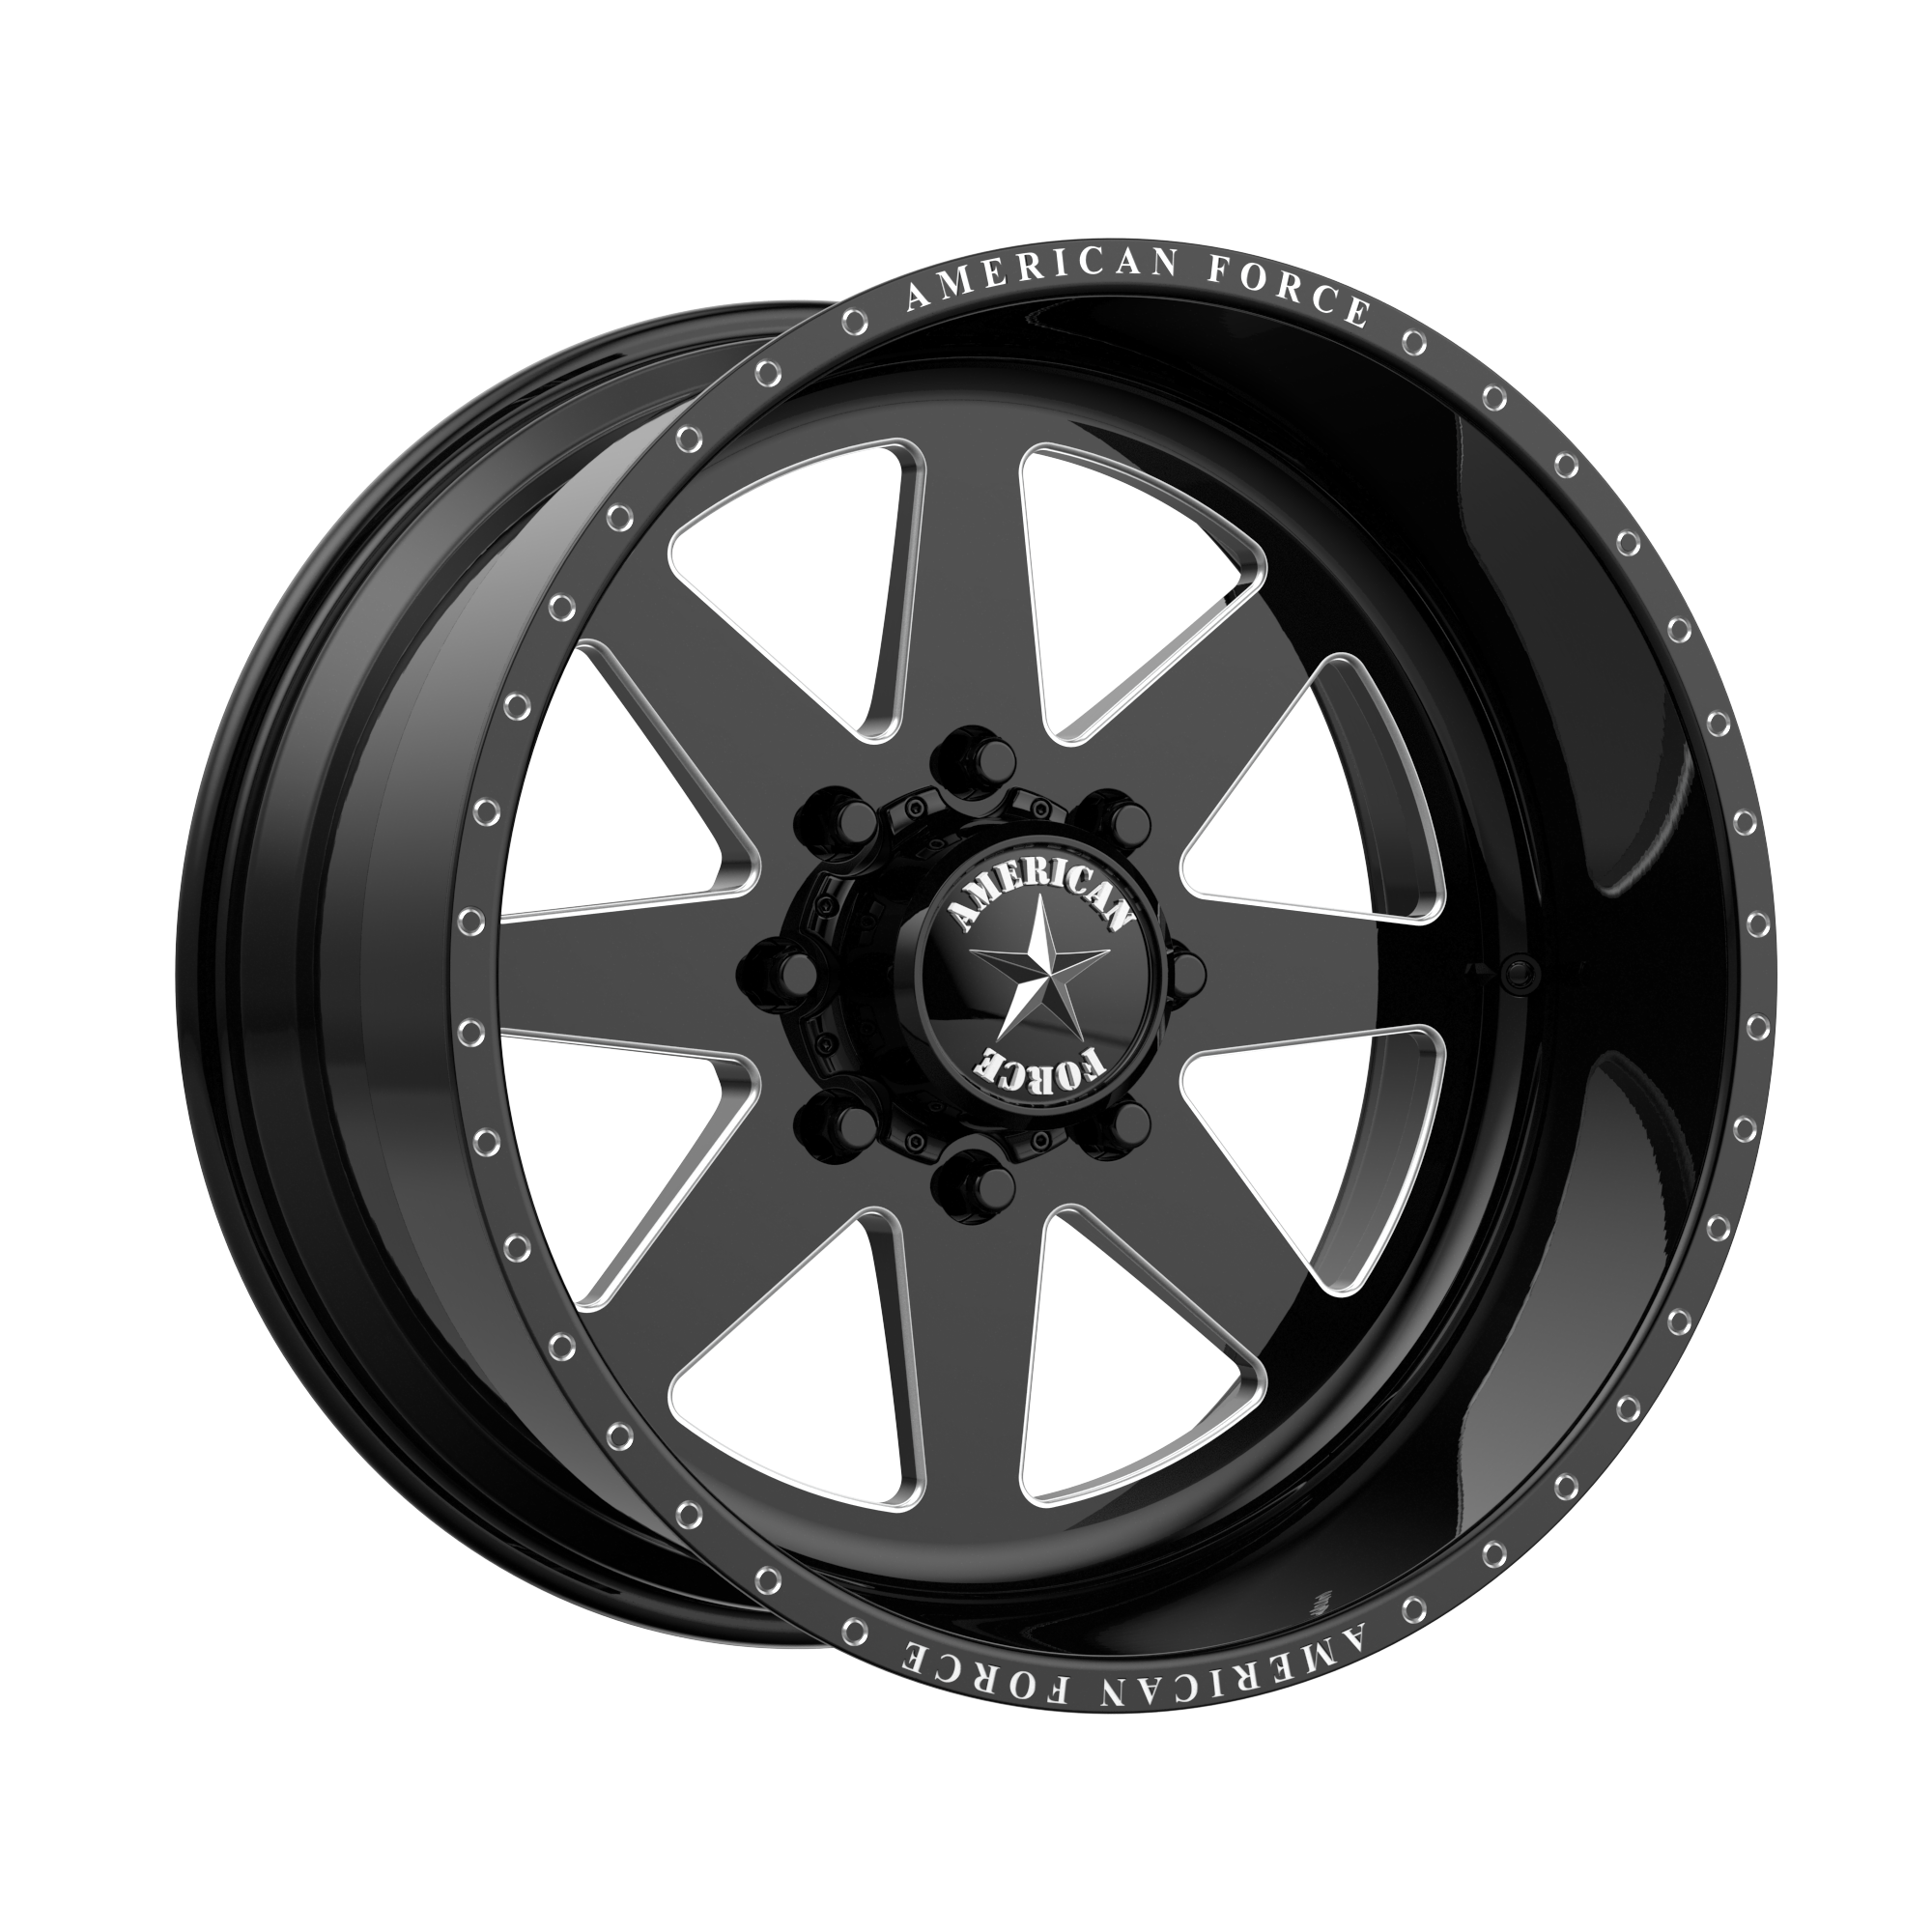 INDEPENDENCE SS 24x14 6x139.70 GLOSS BLACK MACHINED (-73 mm) - Tires and Engine Performance